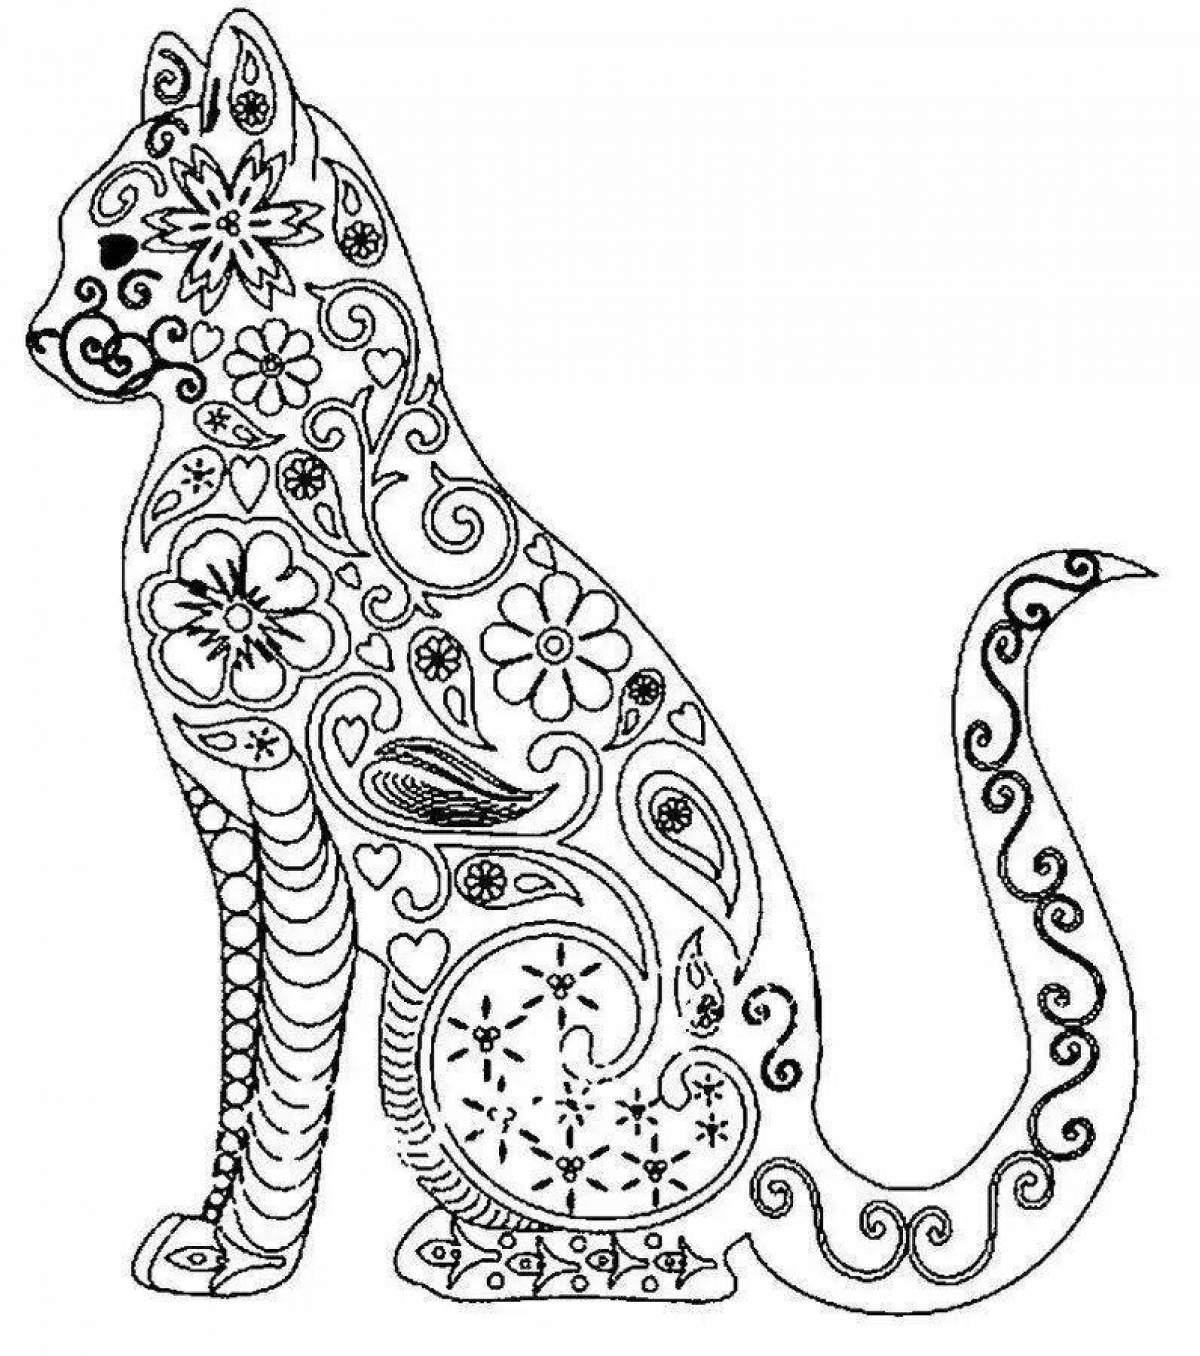 Glitter coloring for girls 12 years old complex patterns antistress animals